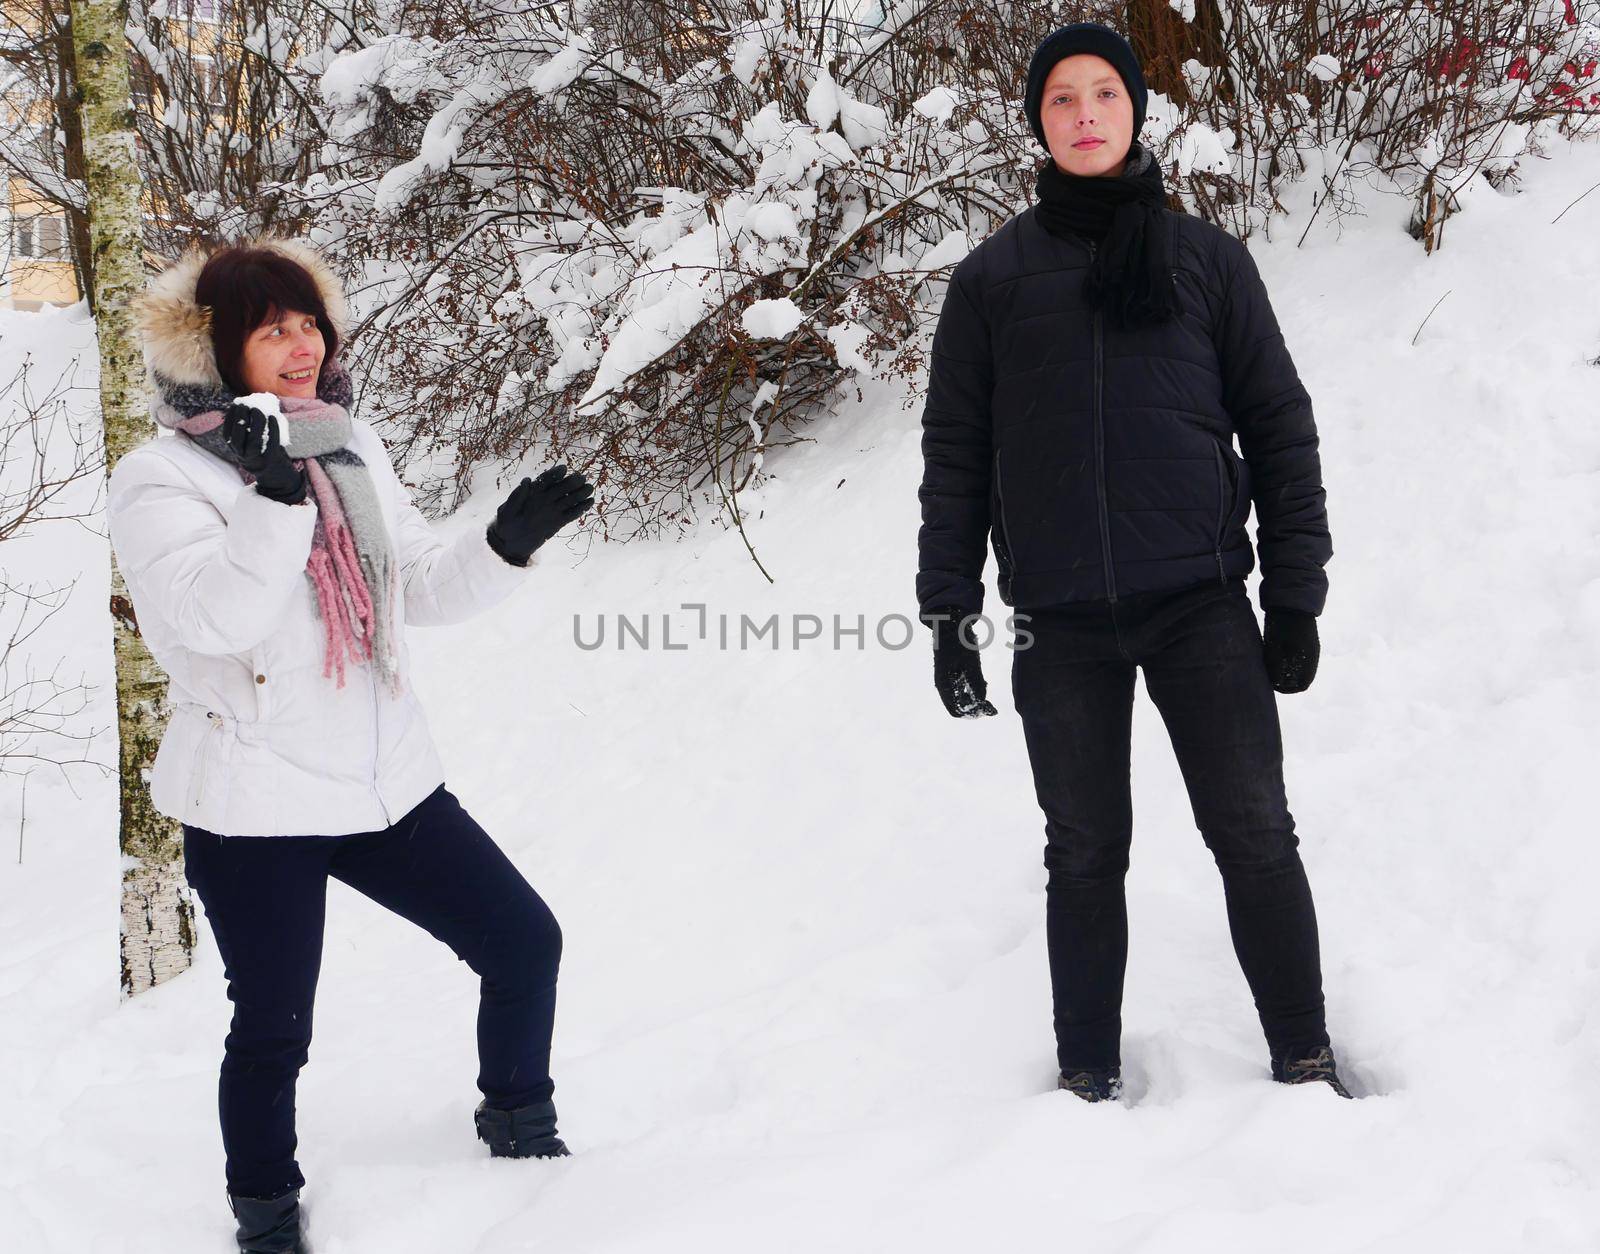 An elderly mother in a white jacket, in a scarf, holds a snowball in her hands near her son in black winter clothes against the backdrop of snow.